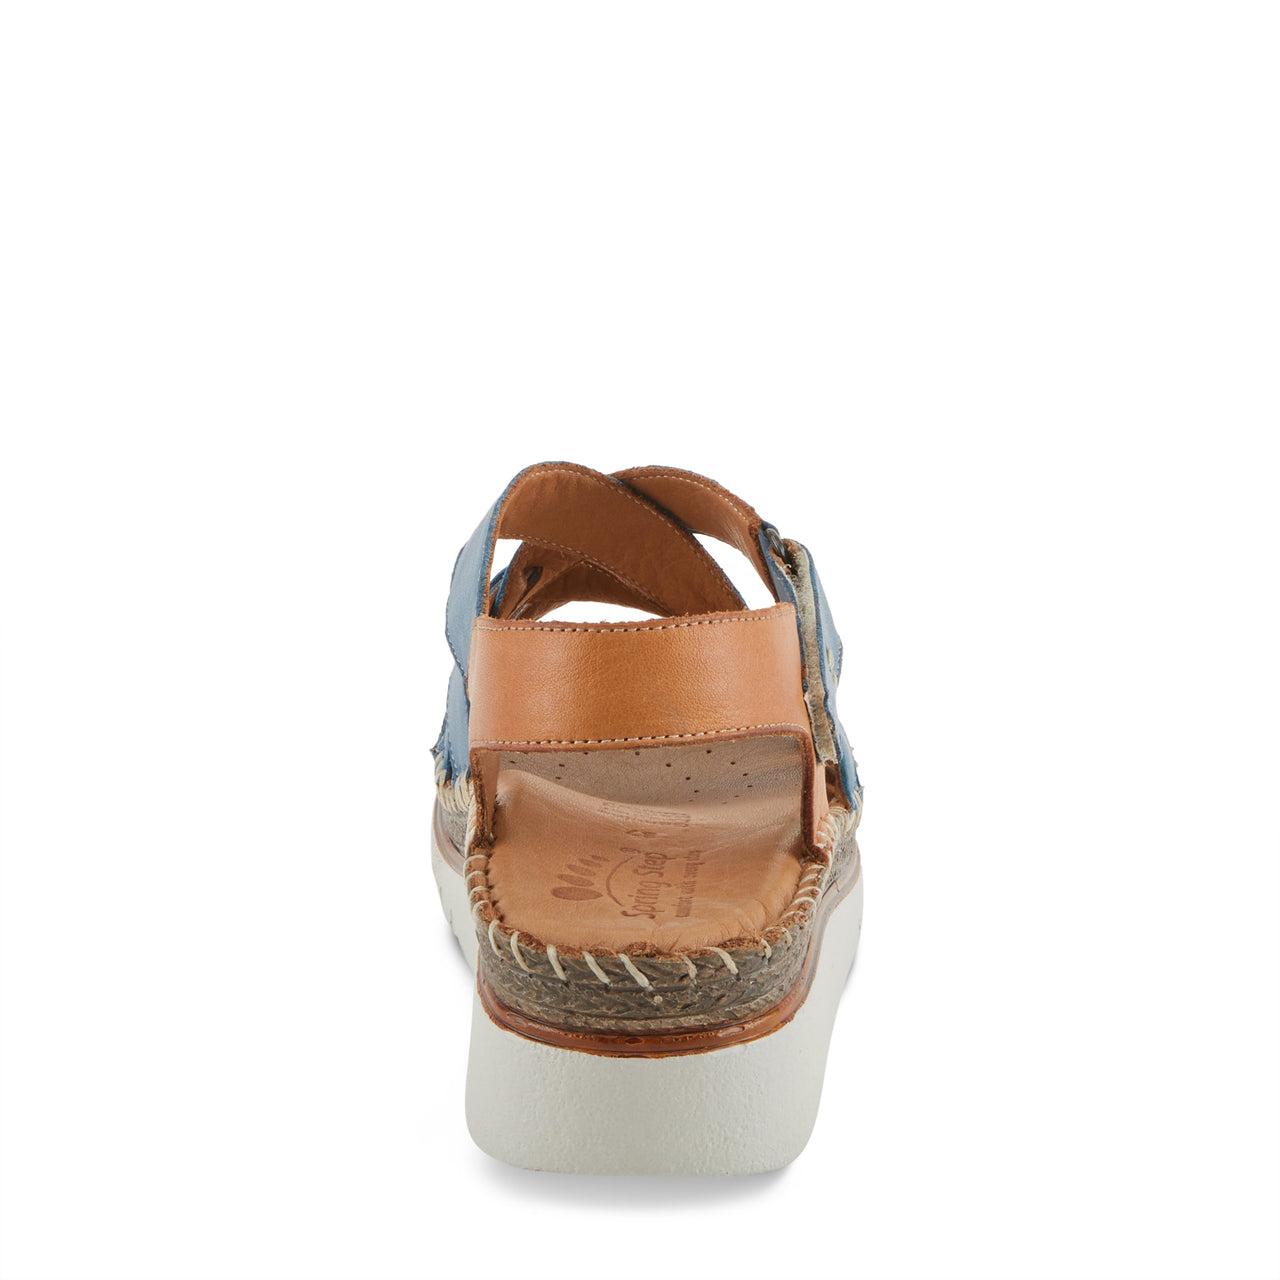 Spring Step Migula Sandals in tan color with floral design and supportive sole